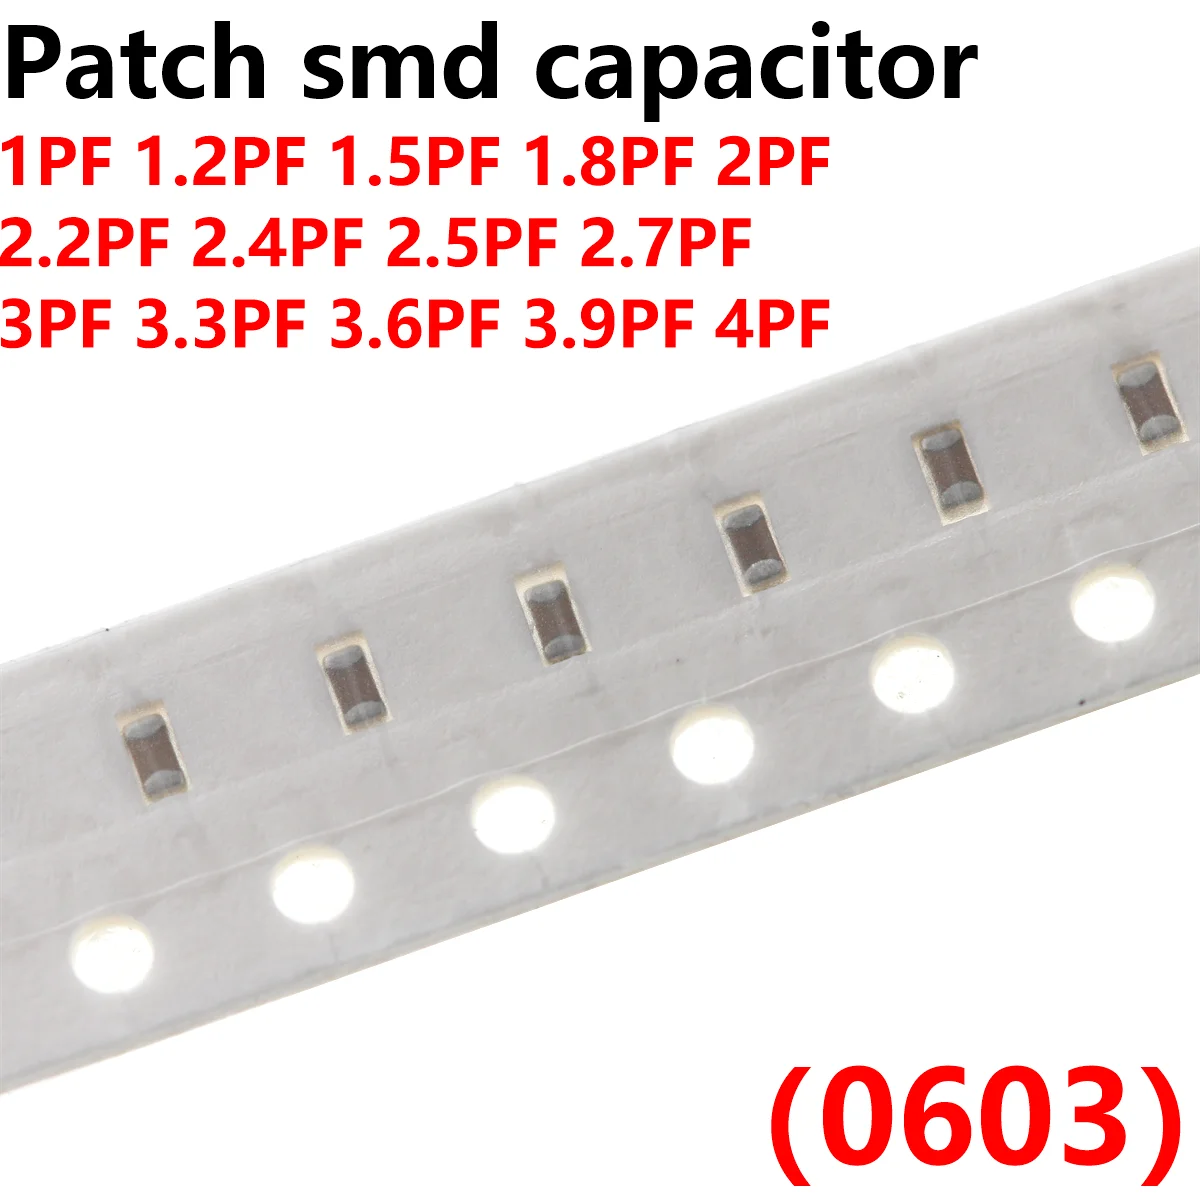 500PCS 0603 Patch smd capacitor 100NF 220NF 470NF 680NF 1UF 2.2UF 11PF 2PF 2.2PF 2.4PF 2.5PF 2.7PF 3PF 3.3PF 3.6PF 3.9PF 4PF